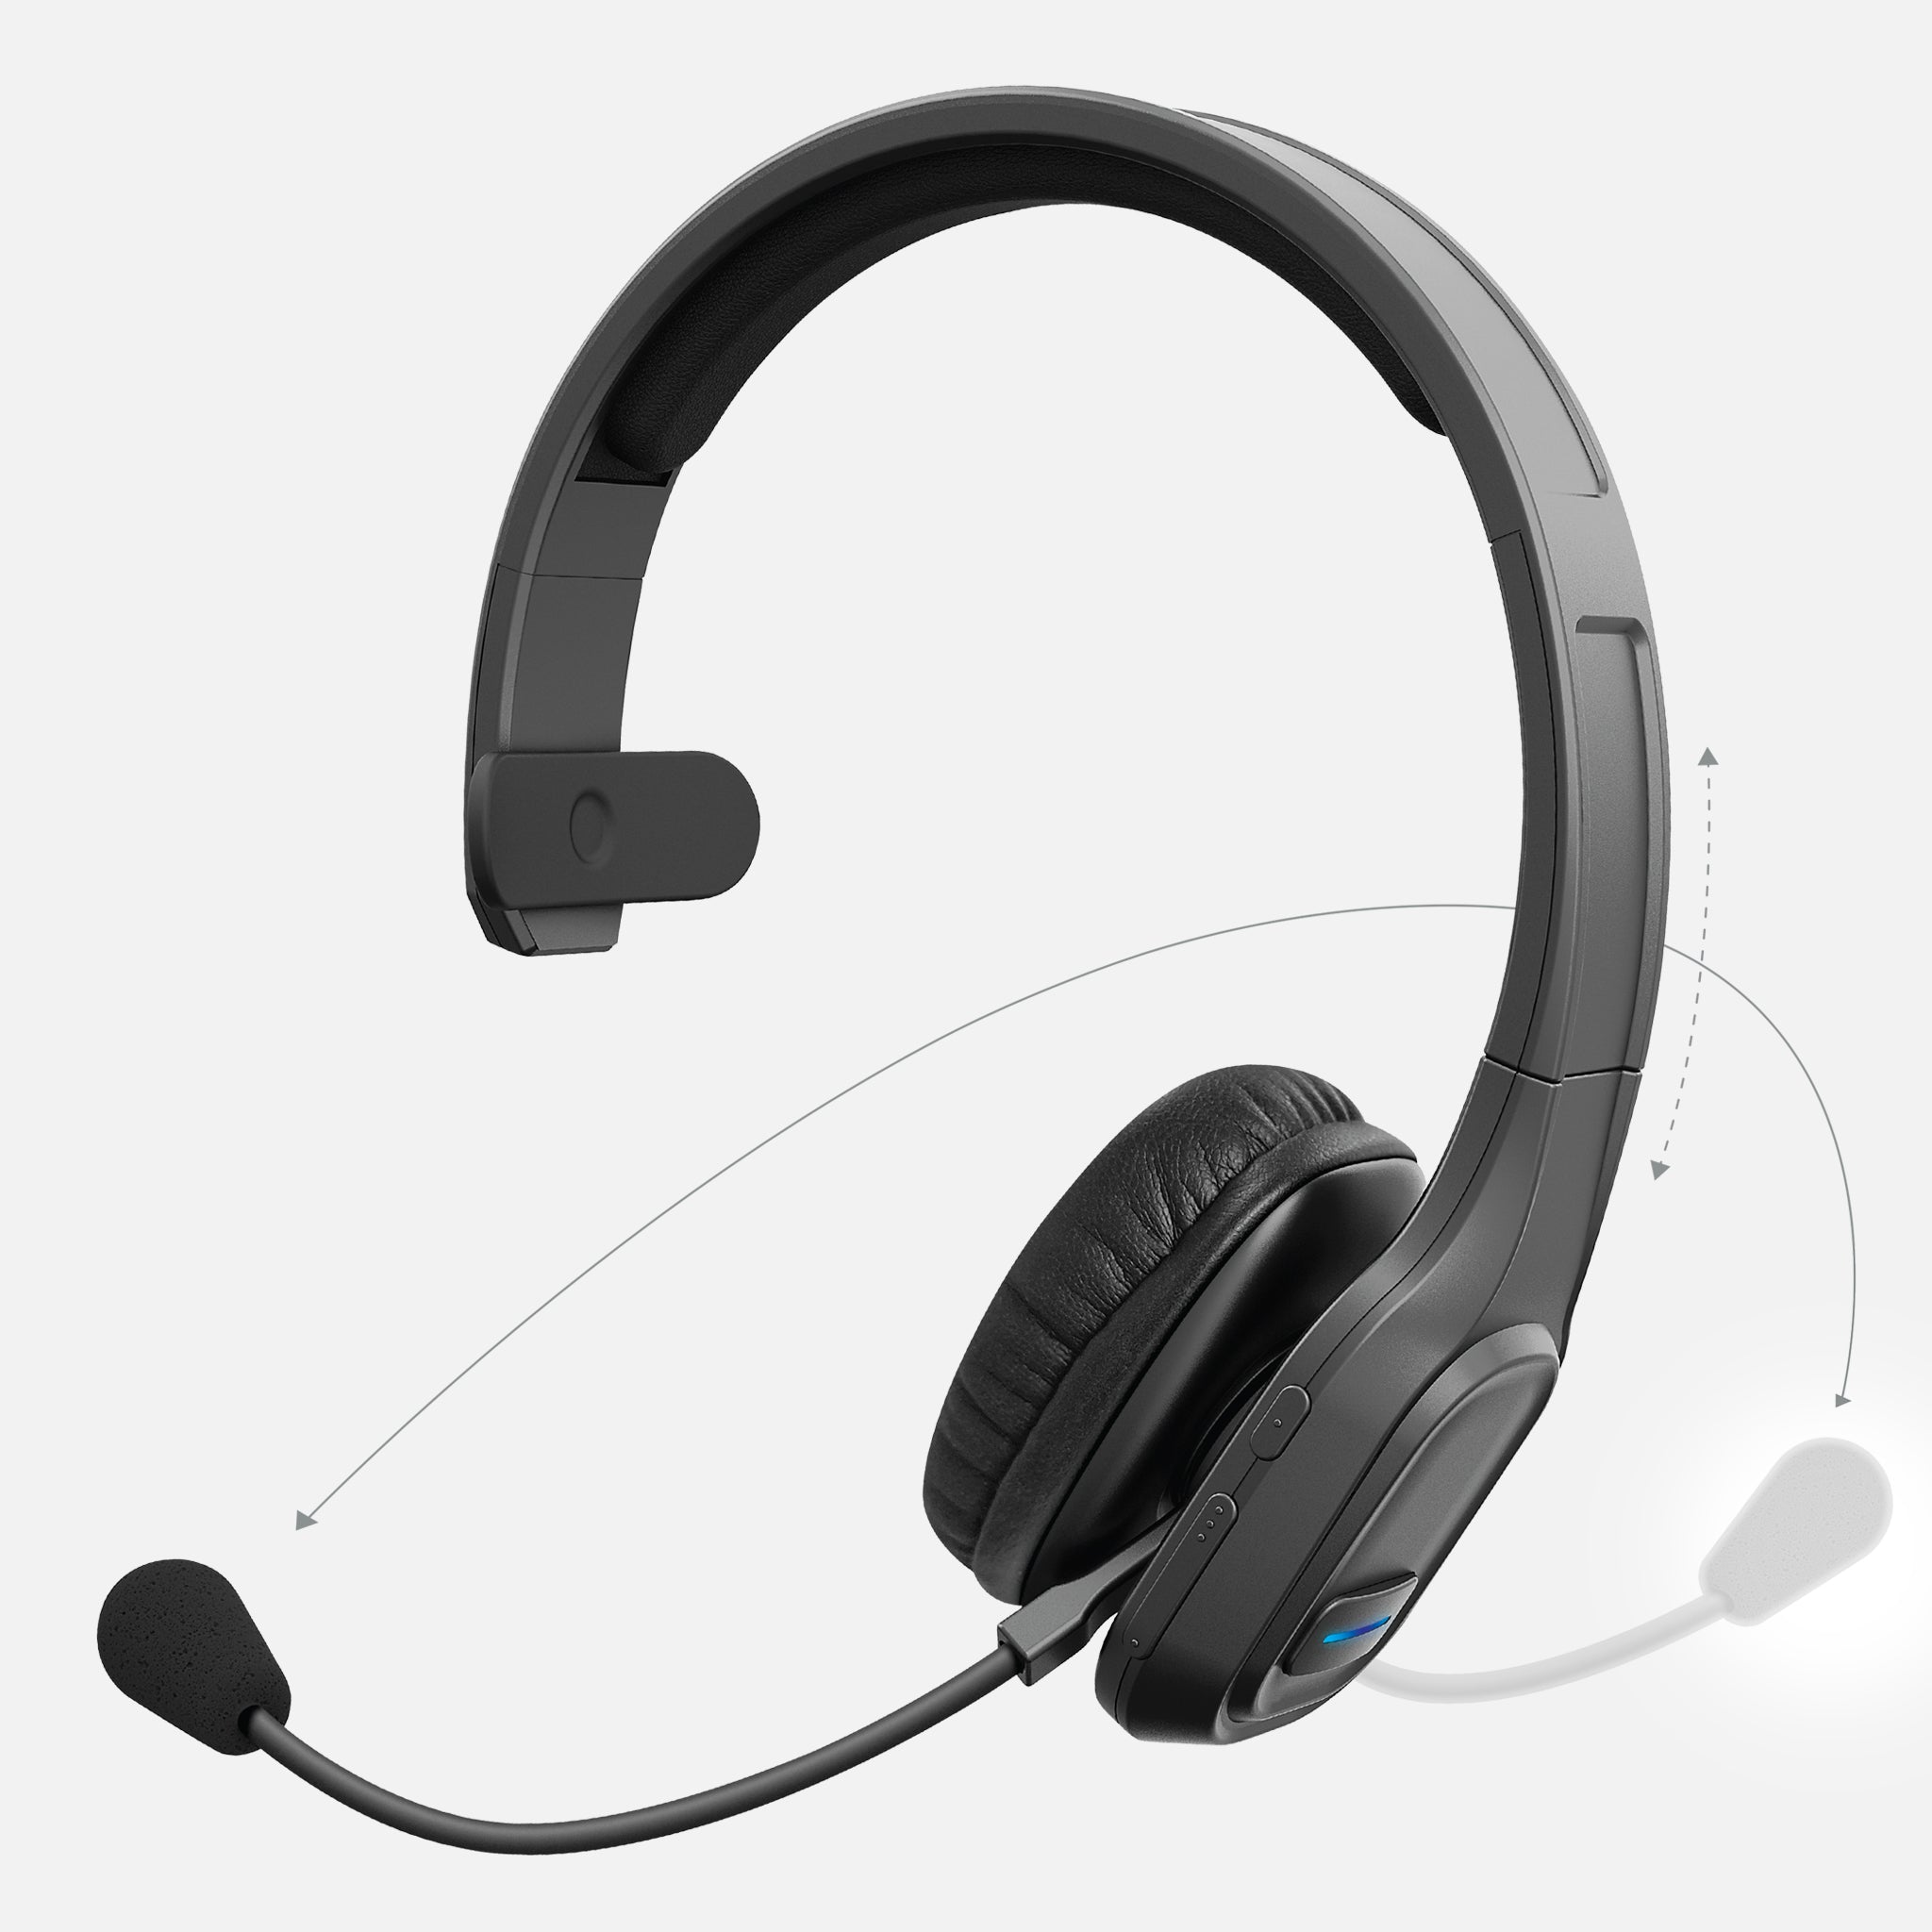 Wireless Headset with Ambient Noise-Canceling Mic - CAR AND DRIVER BT5500